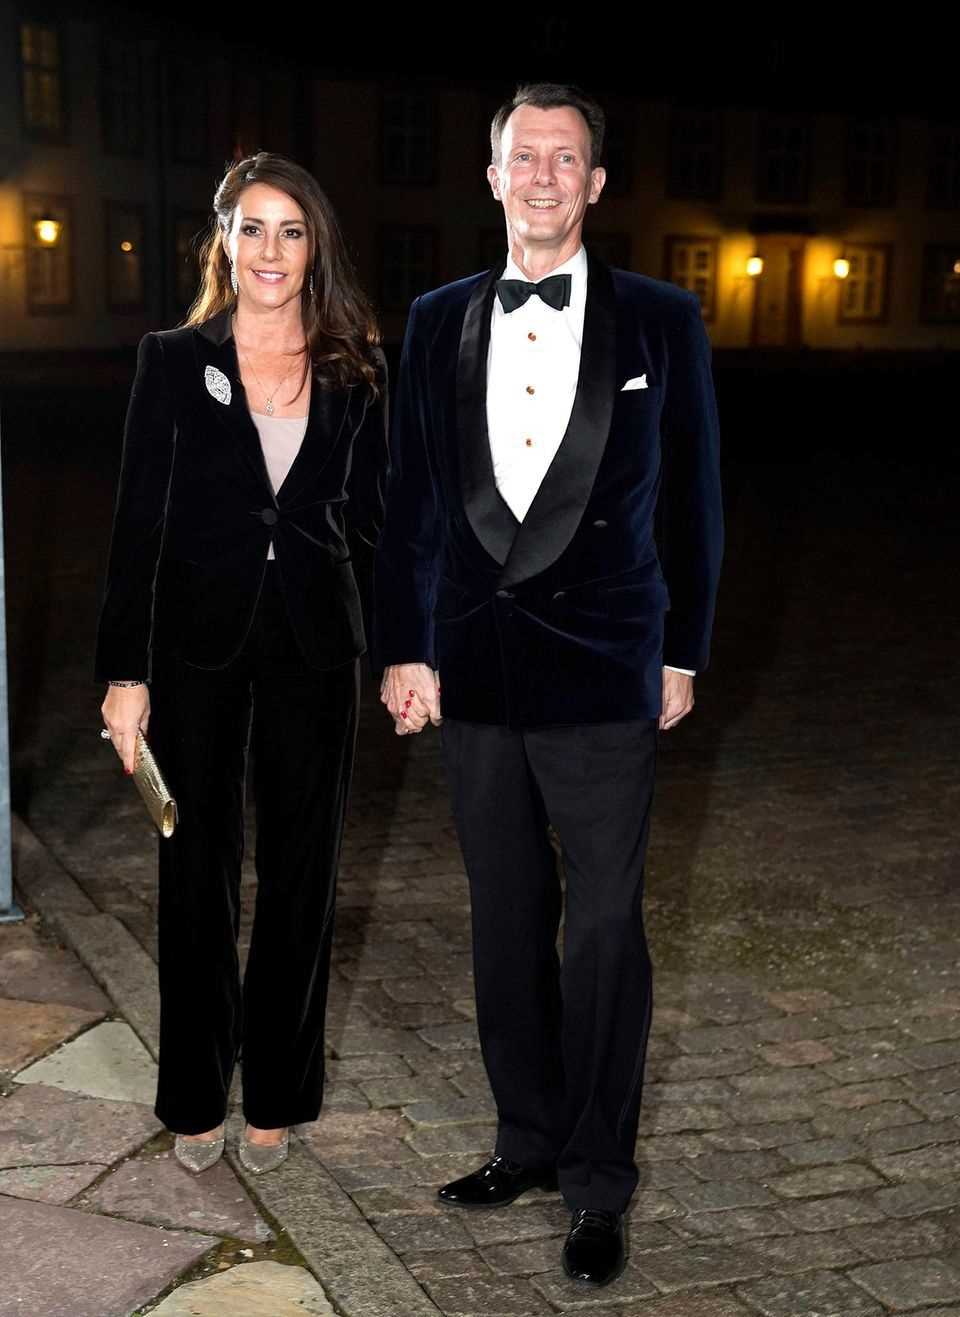 Princess Marie and Prince Joachim of Denmark pose for the photographers.